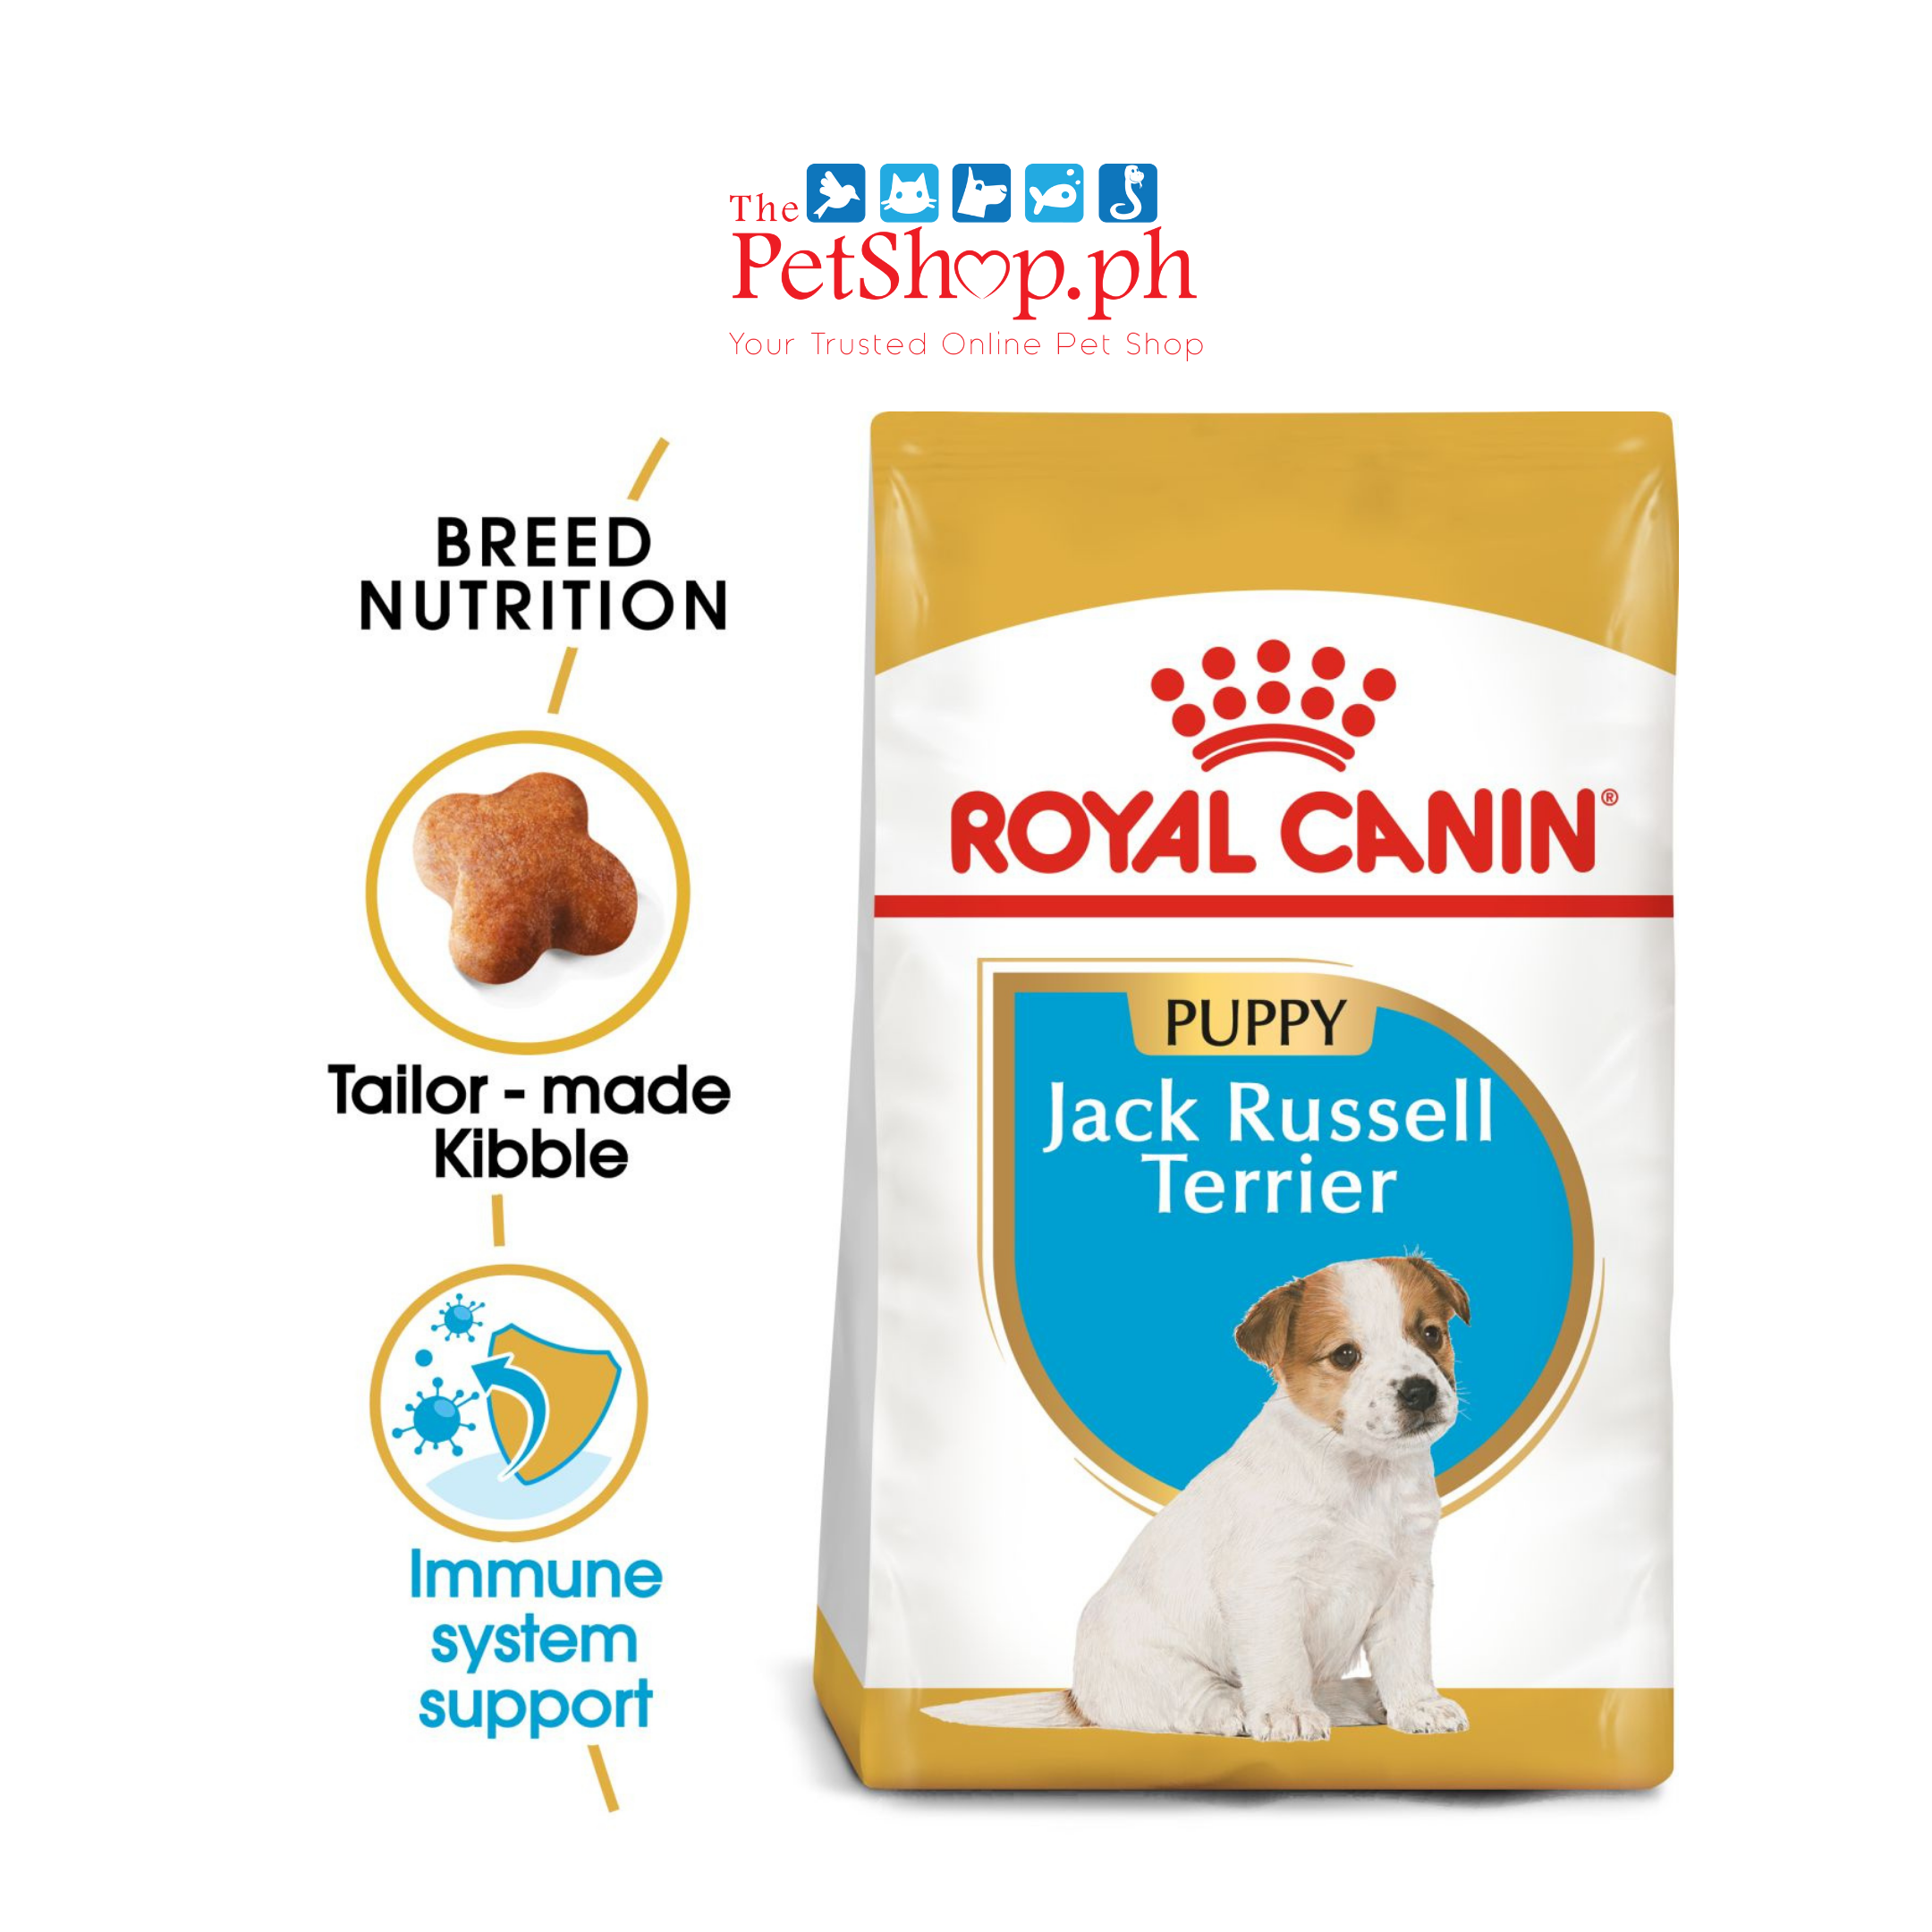 Royal Canin Jack Russell Terrier Puppy 500g Original  Dry Dog Food - Breed Health Nutrition